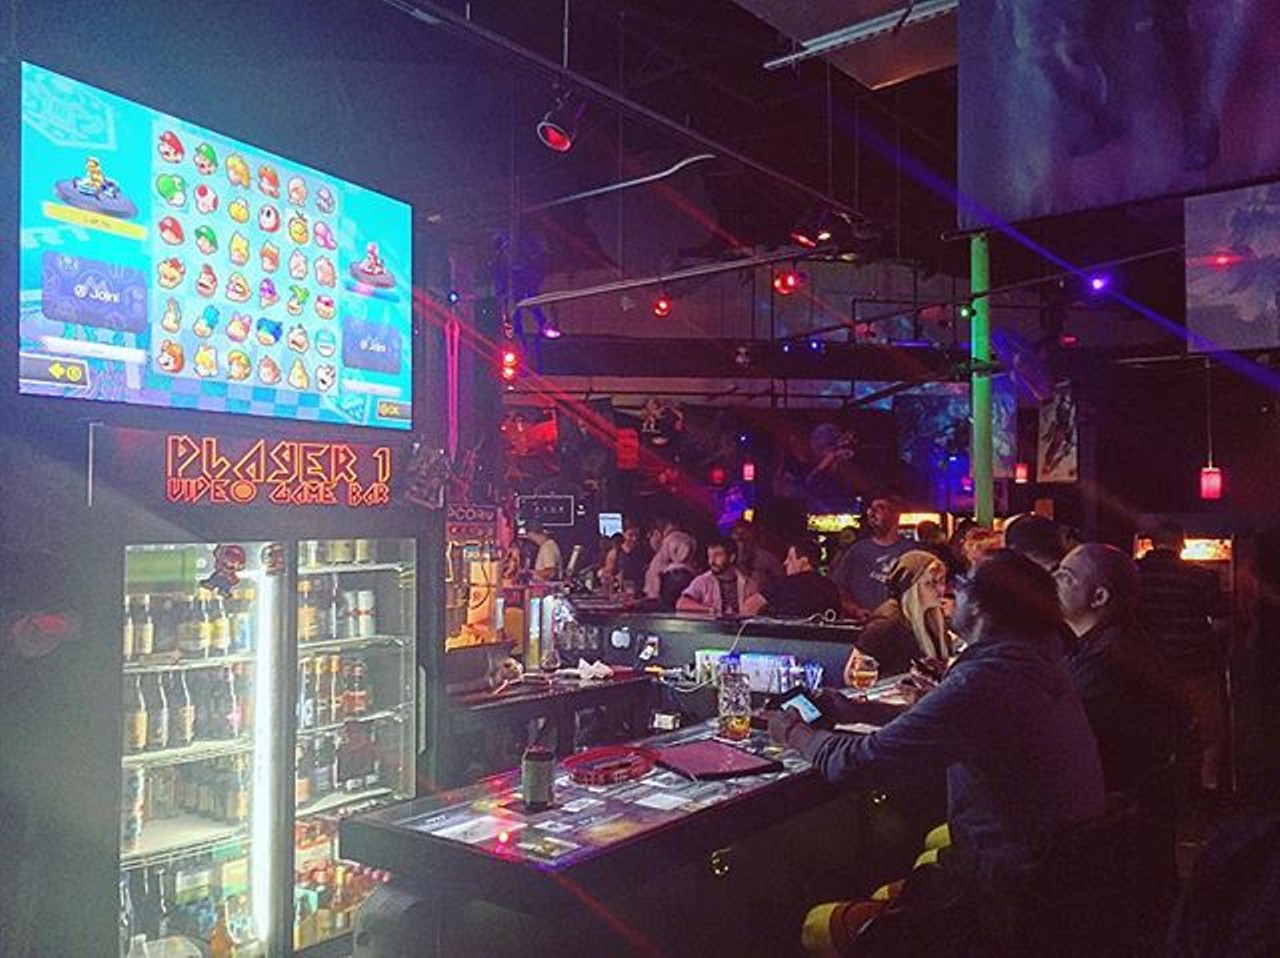 I Don't Like Gaming, But This Arcade Bar In Florida Was Shockingly